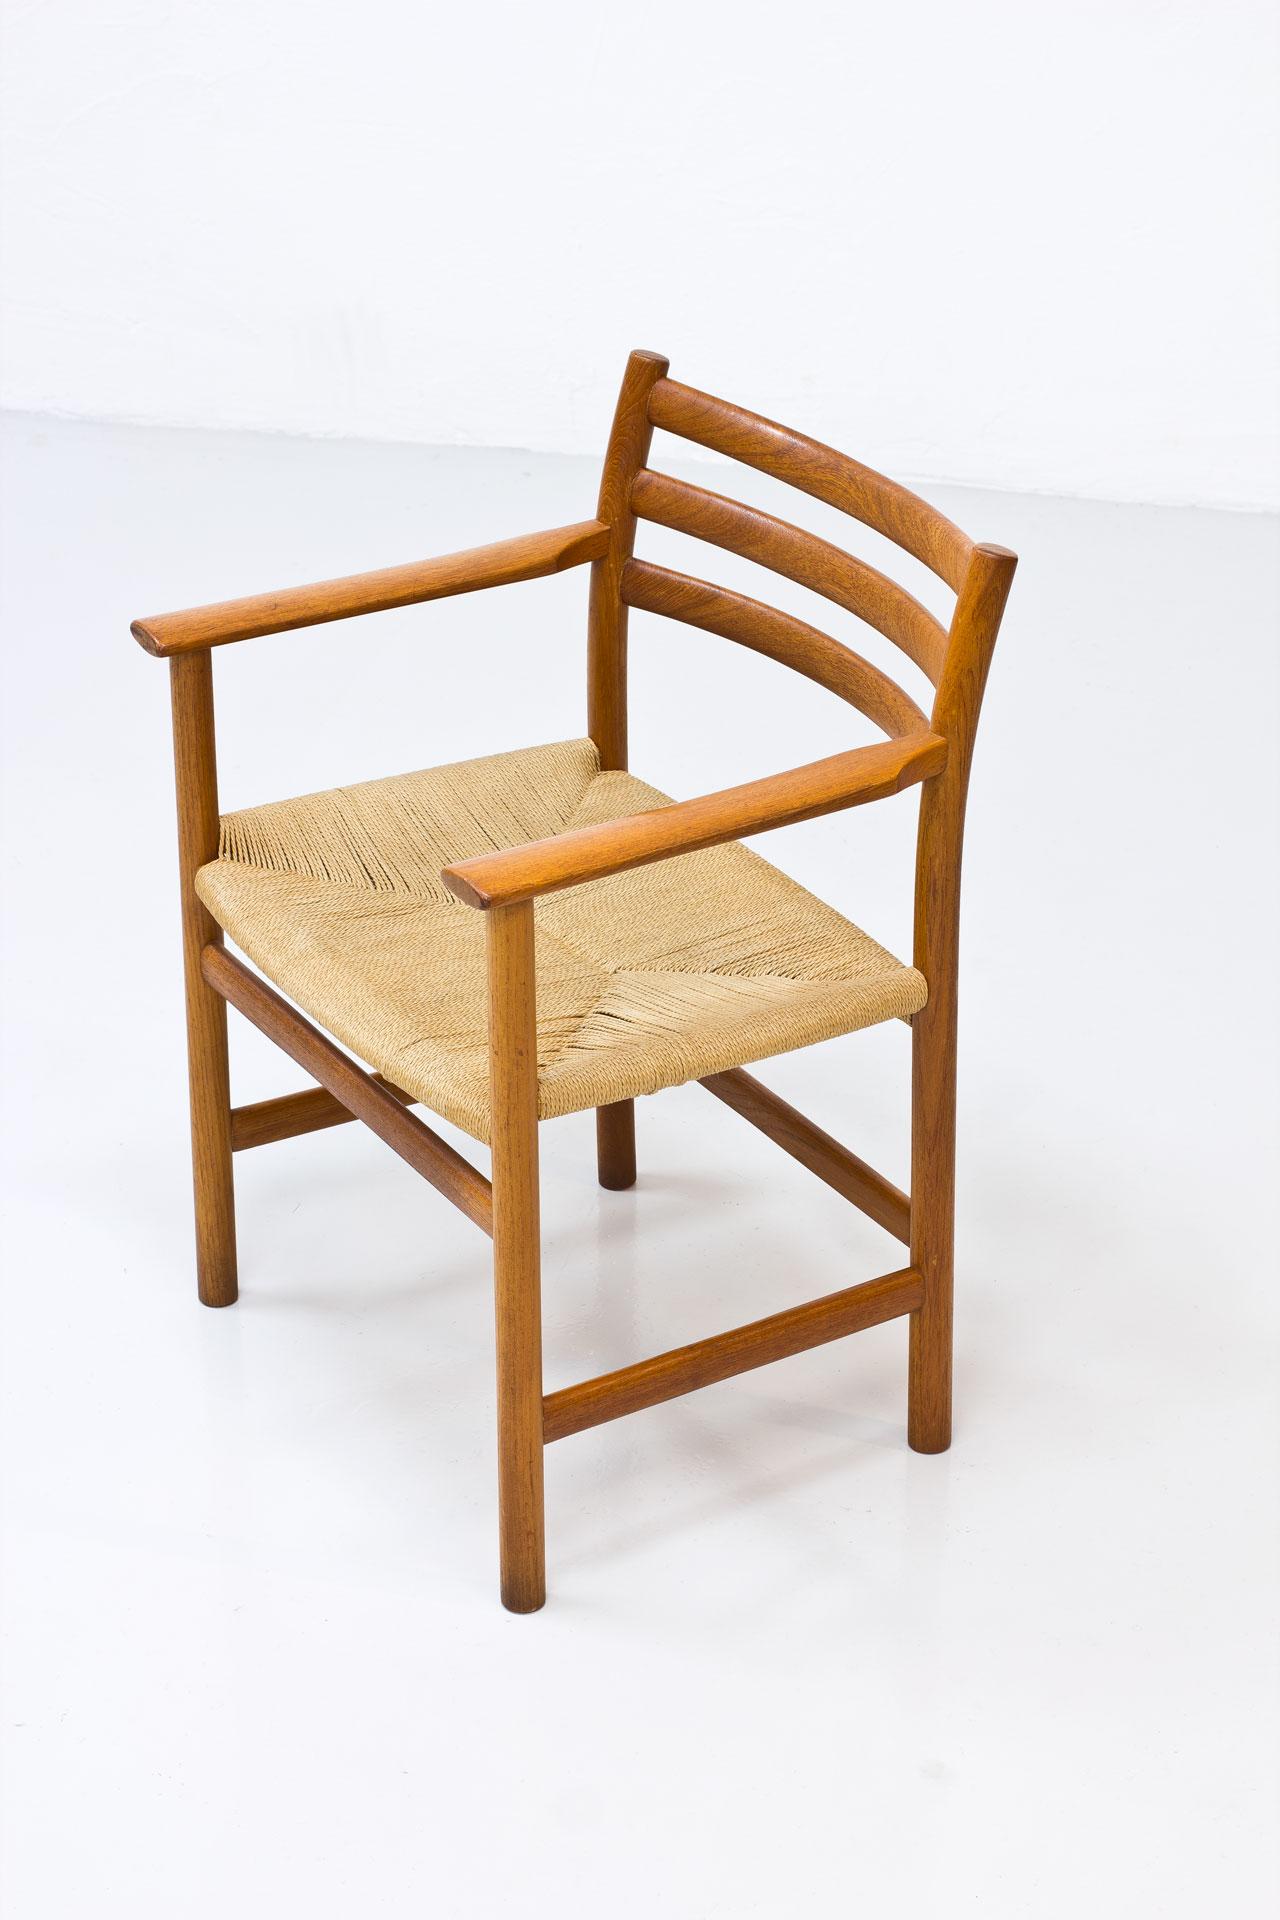 Armchair model 351 designed by
Poul Volther. Manufactured in
Denmark by Sorø Stolefabrik in
the 1960s. Made from teak with
paper cord seat.